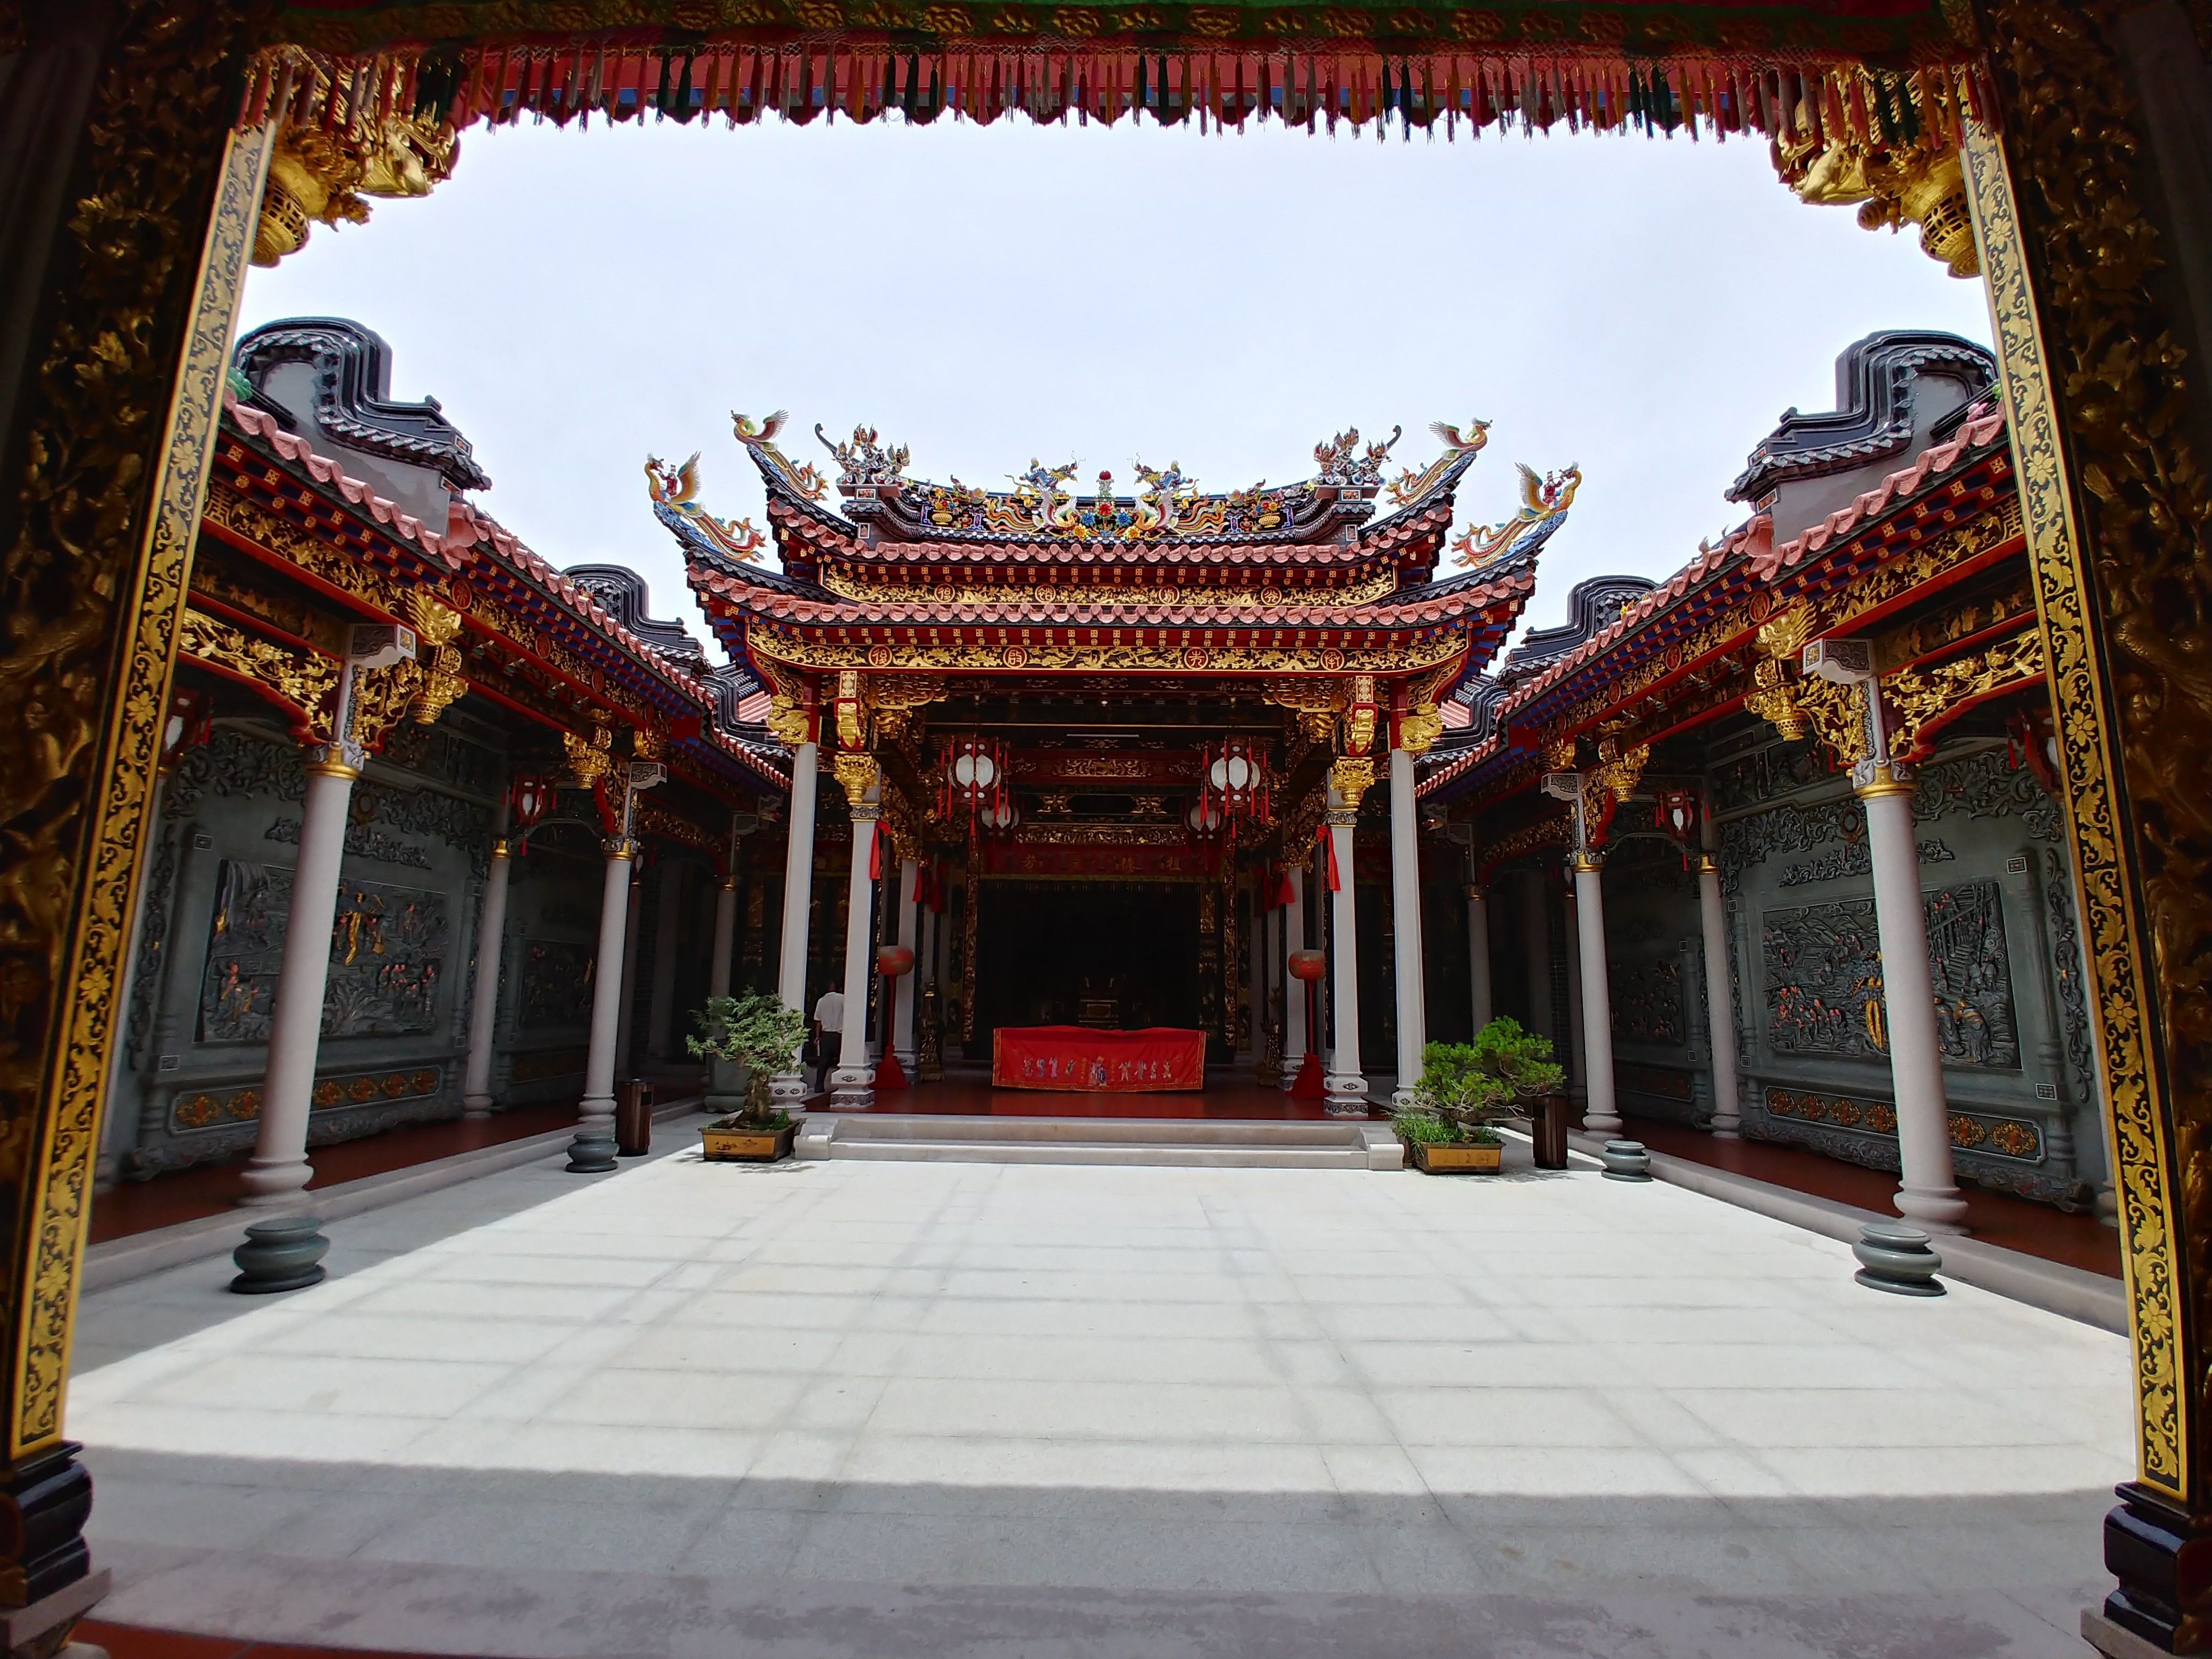 Chaozhou woodcarving in Chaozhou architecture in modern times. Photo: Anven Wu